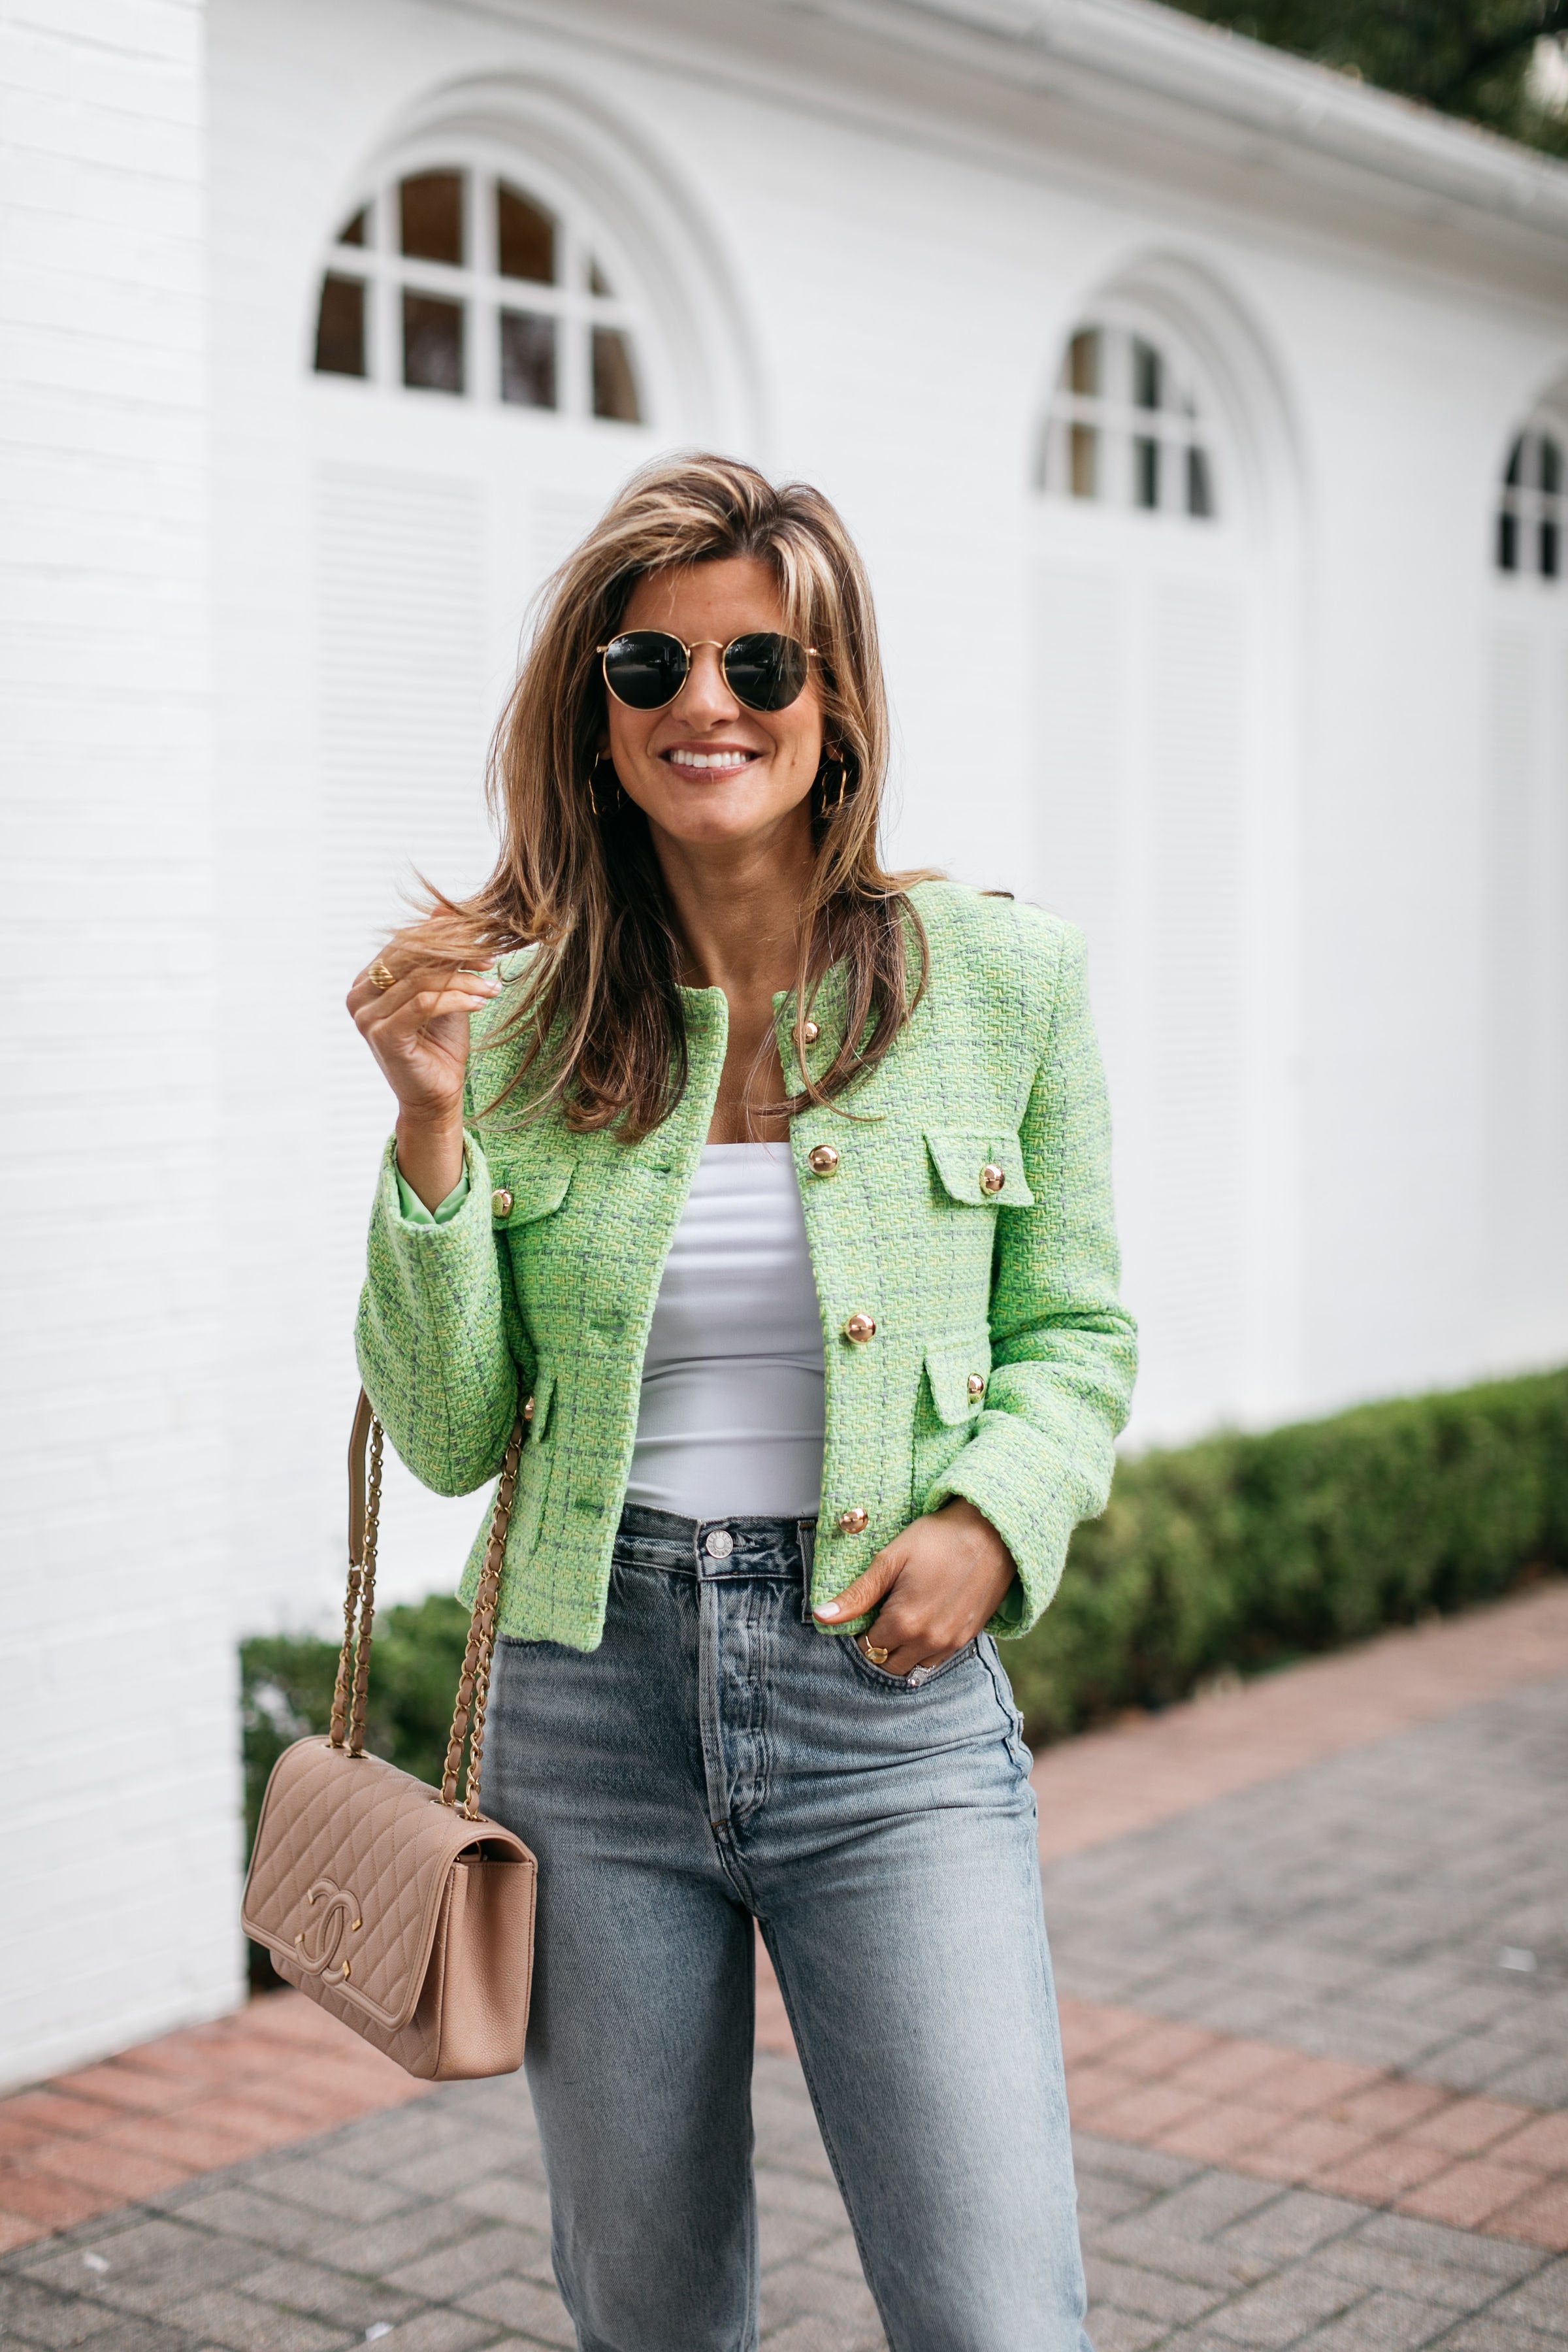 Spring Style Spectacular with a Tweed Blazer and White Jeans